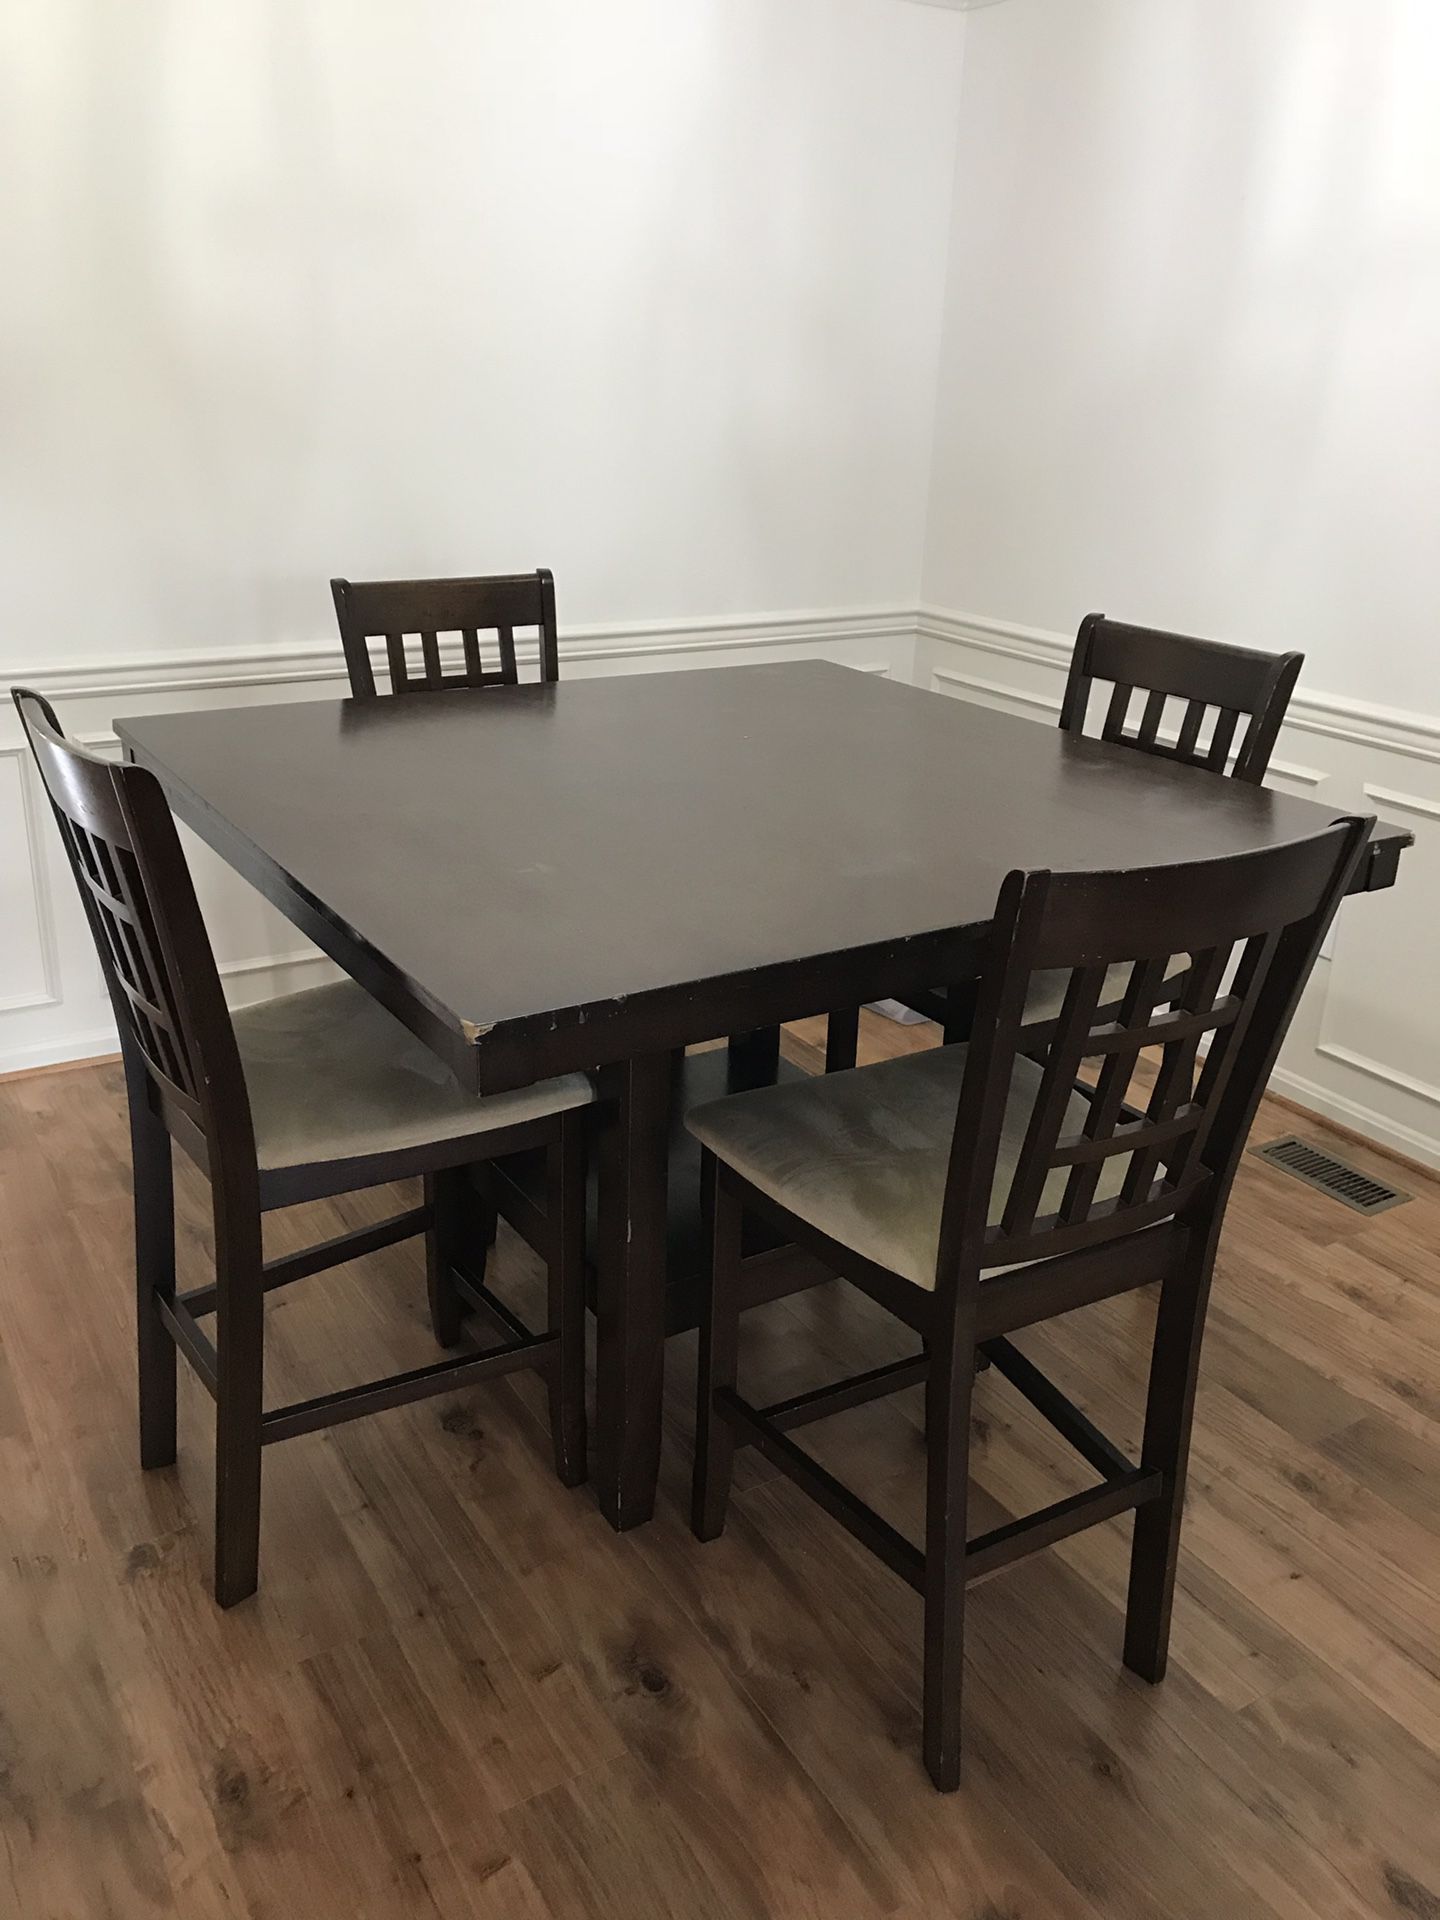 Elegant Wood Dining Room Table w/Plush Chairs